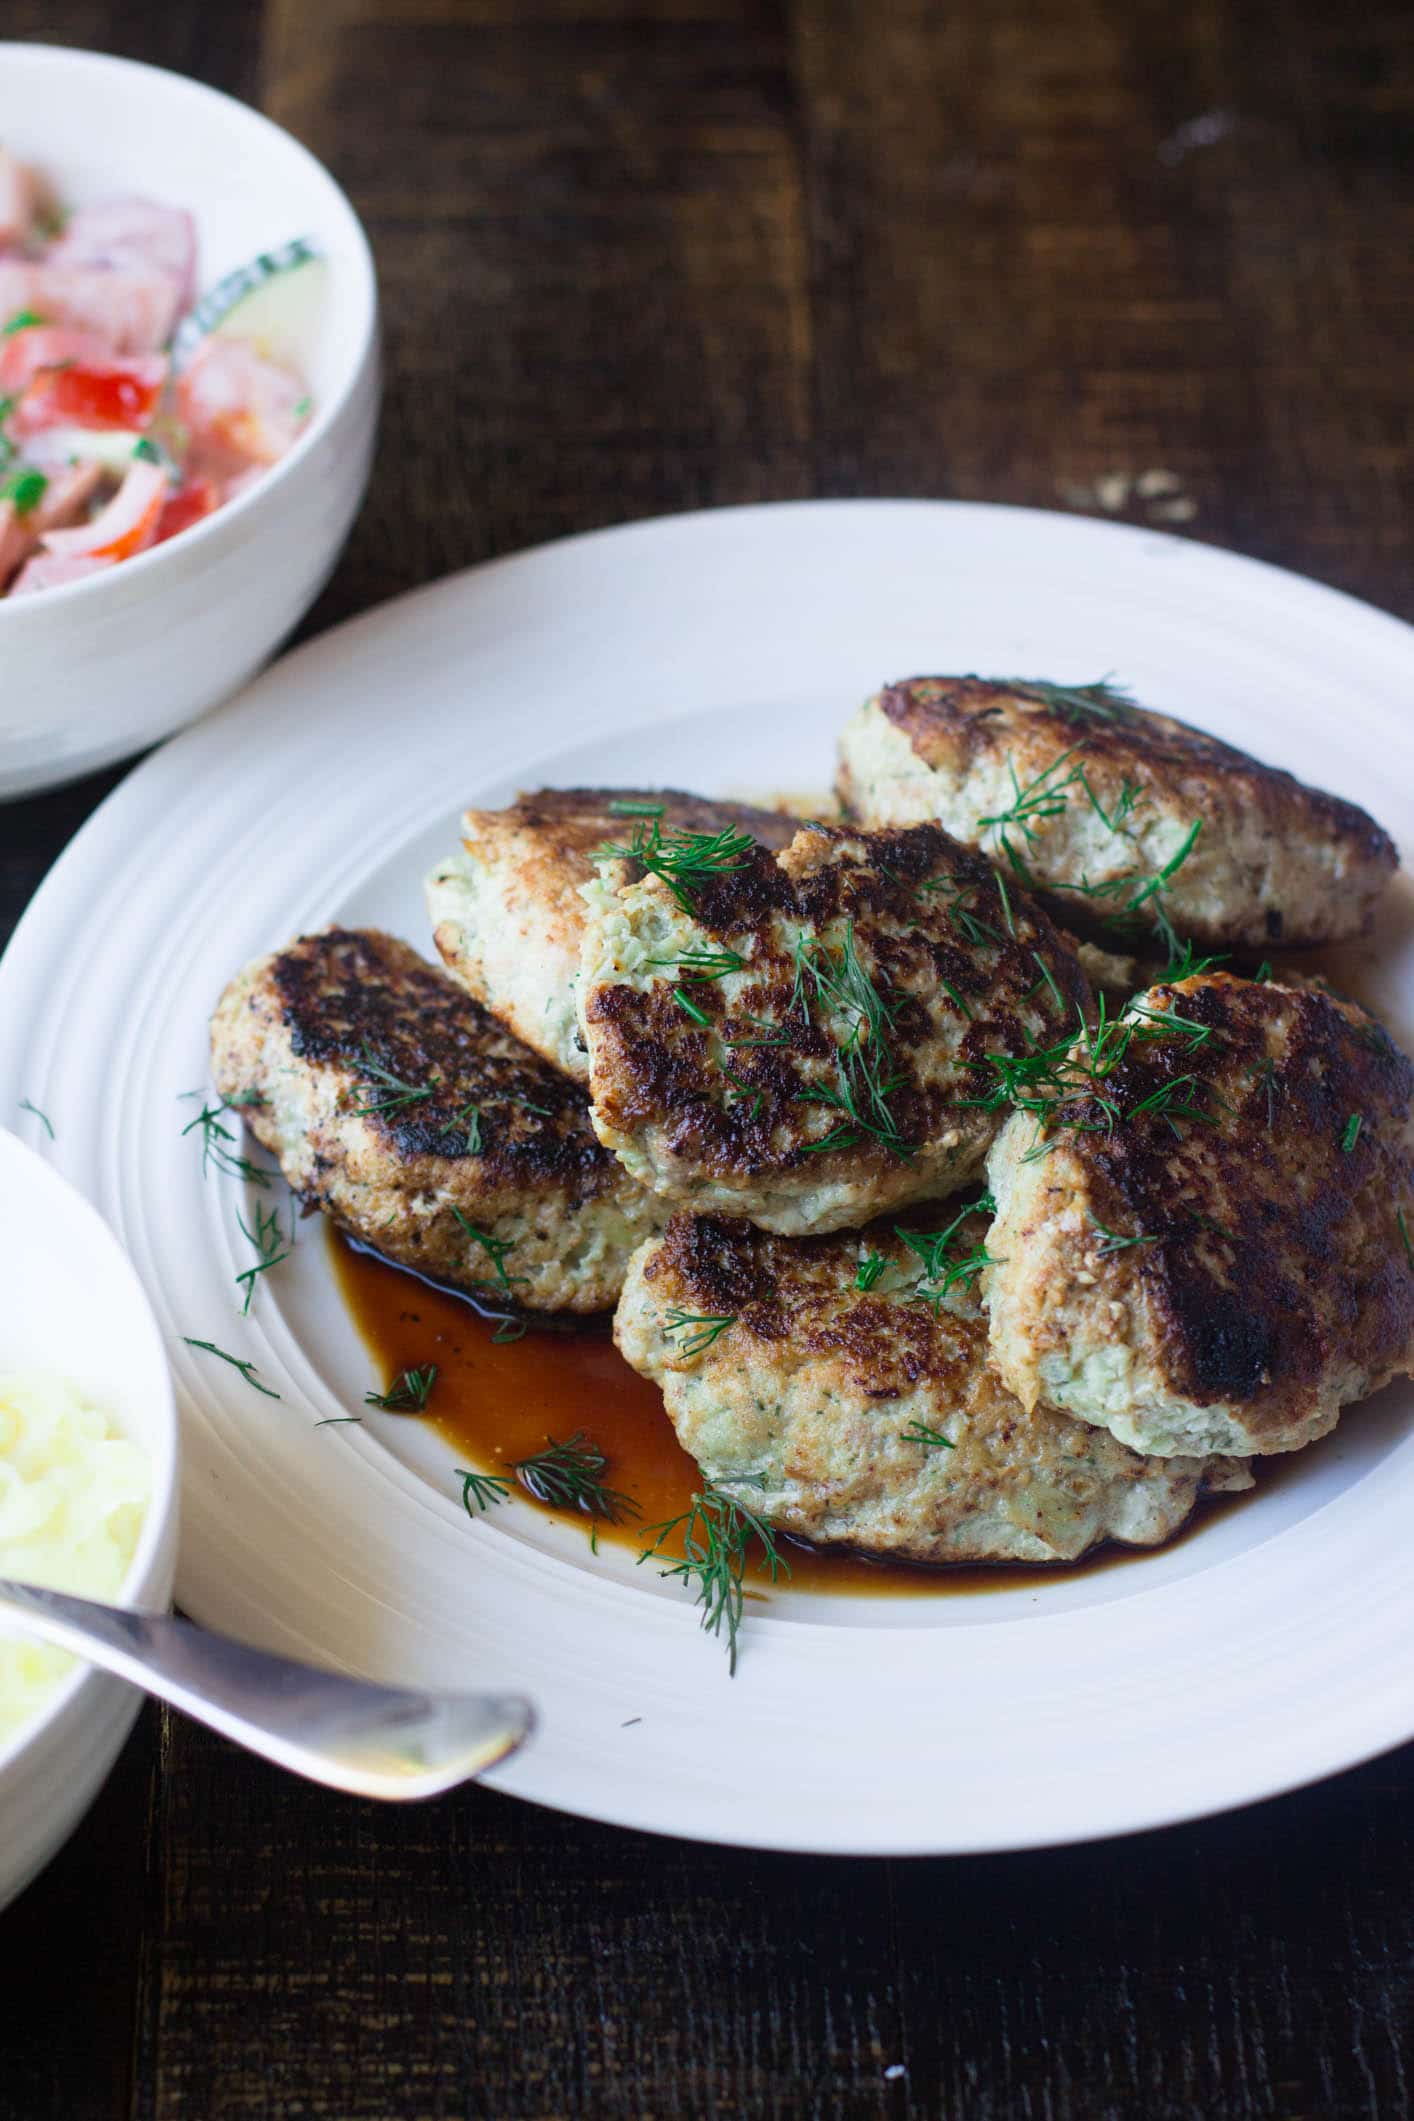 Juicy ground chicken cutlets mixed together with dill, onion and an egg all in a Vitamix then pan fried to golden perfection. This is Russian comfort food made even easier!